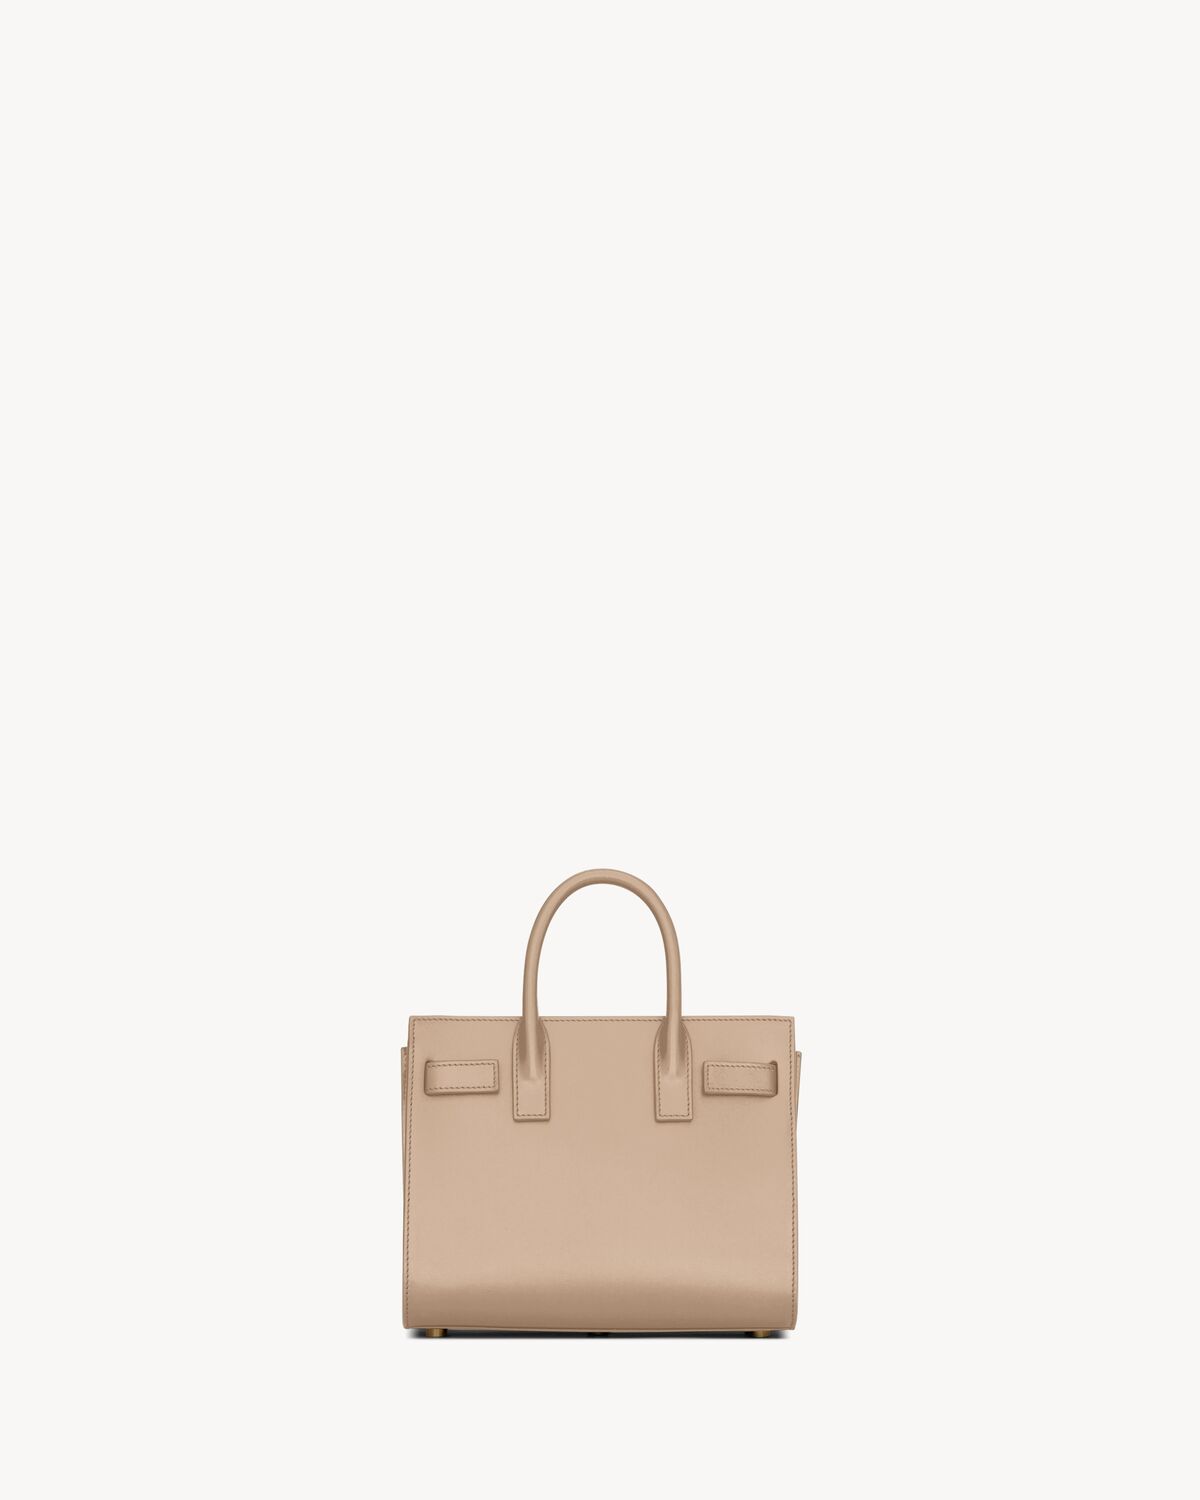 SAC DE JOUR NANO IN SMOOTH LEATHER